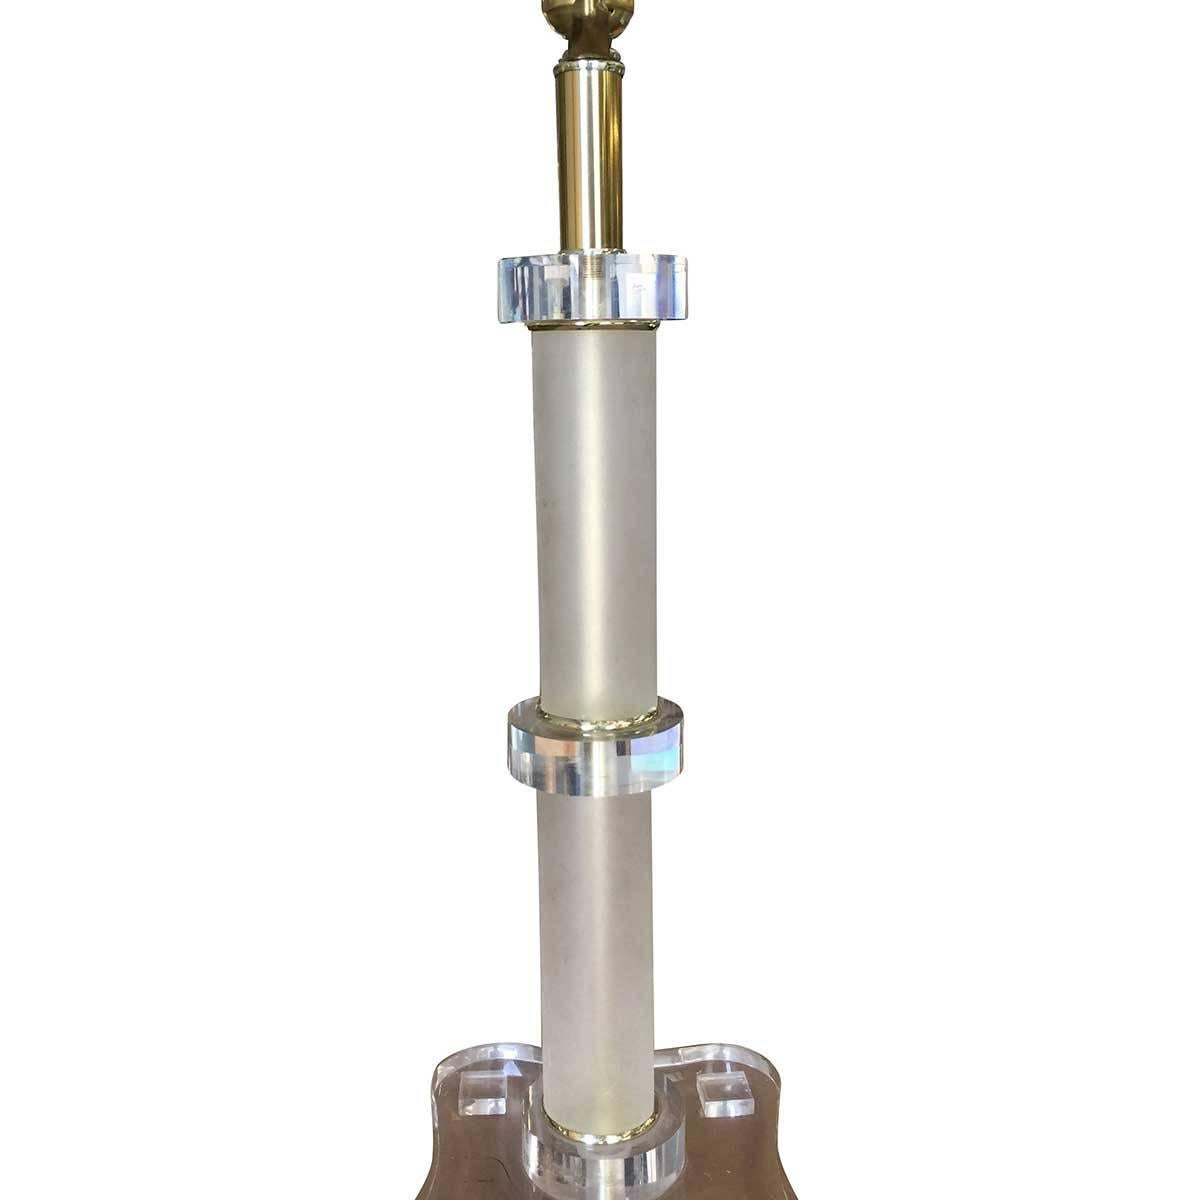 Modern Columnar Lucite and Brass Rods Table Reading Lamp, circa 1970